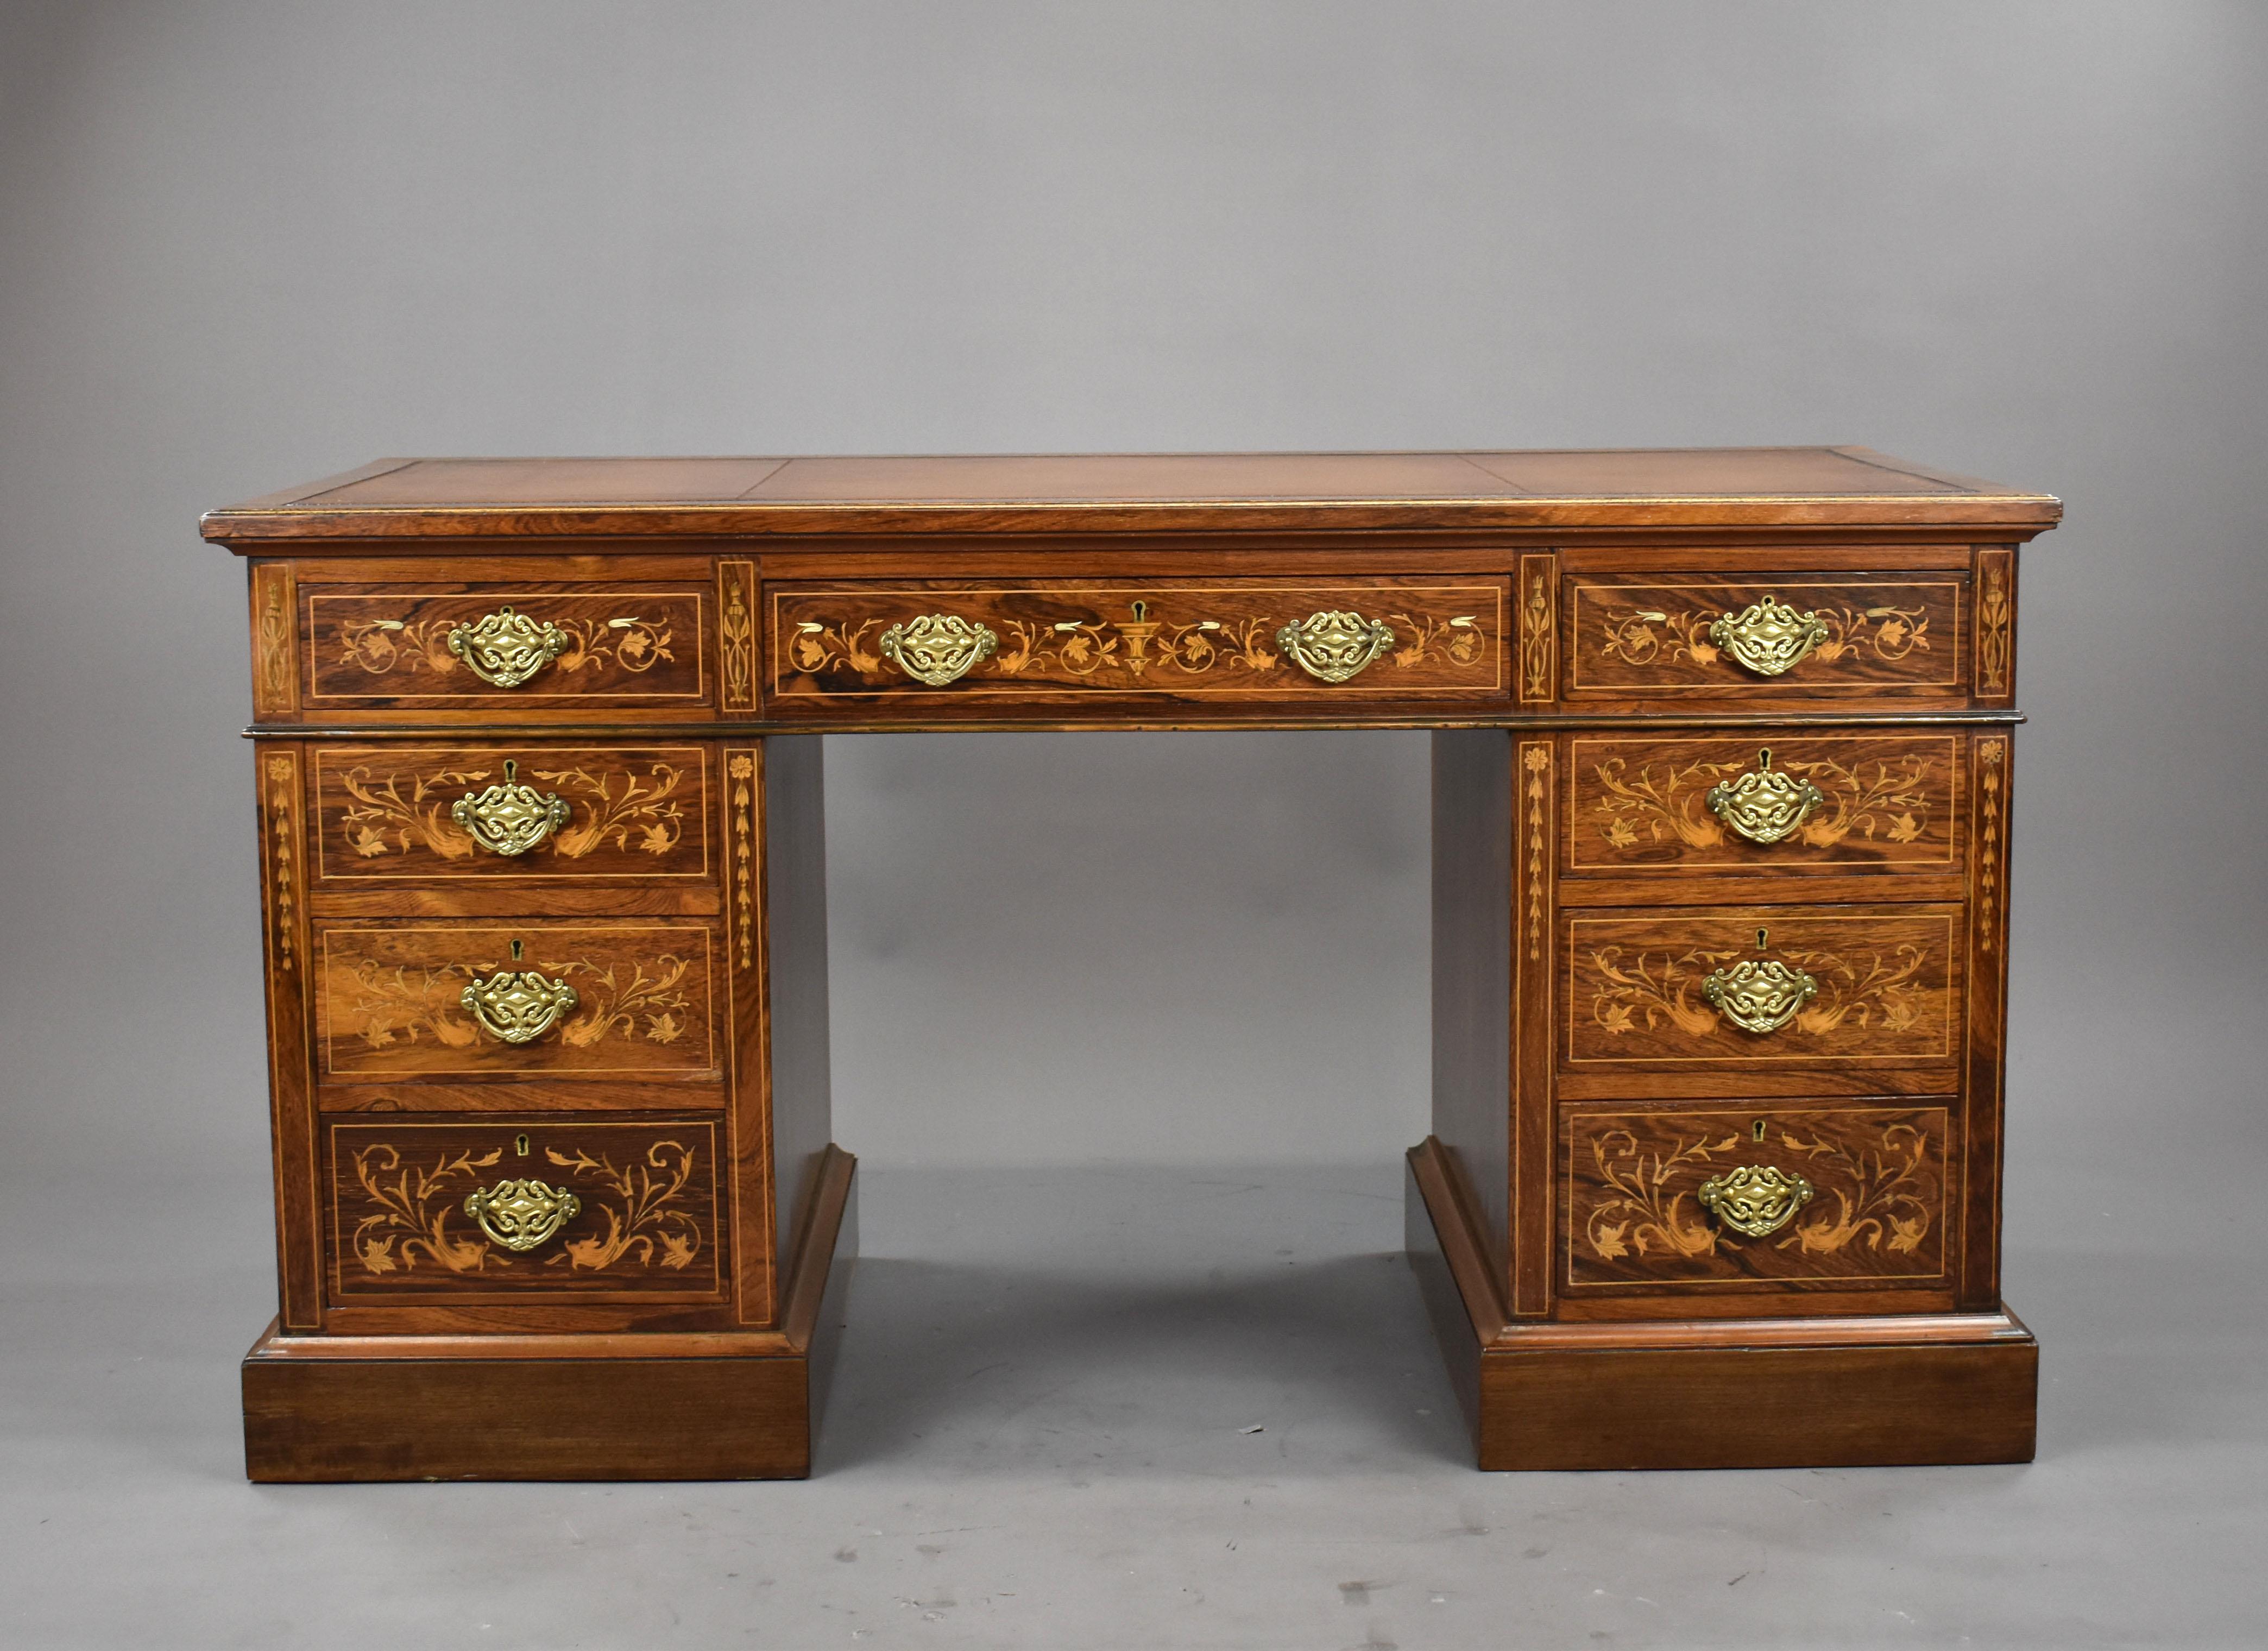 A good quality Victorian rosewood and marquetry writing, having a green leather writing surface, decorated with blind and gold tooling above an arrangement of 9 drawers, each with original brass handles. The desk stands on a plinth base and is in